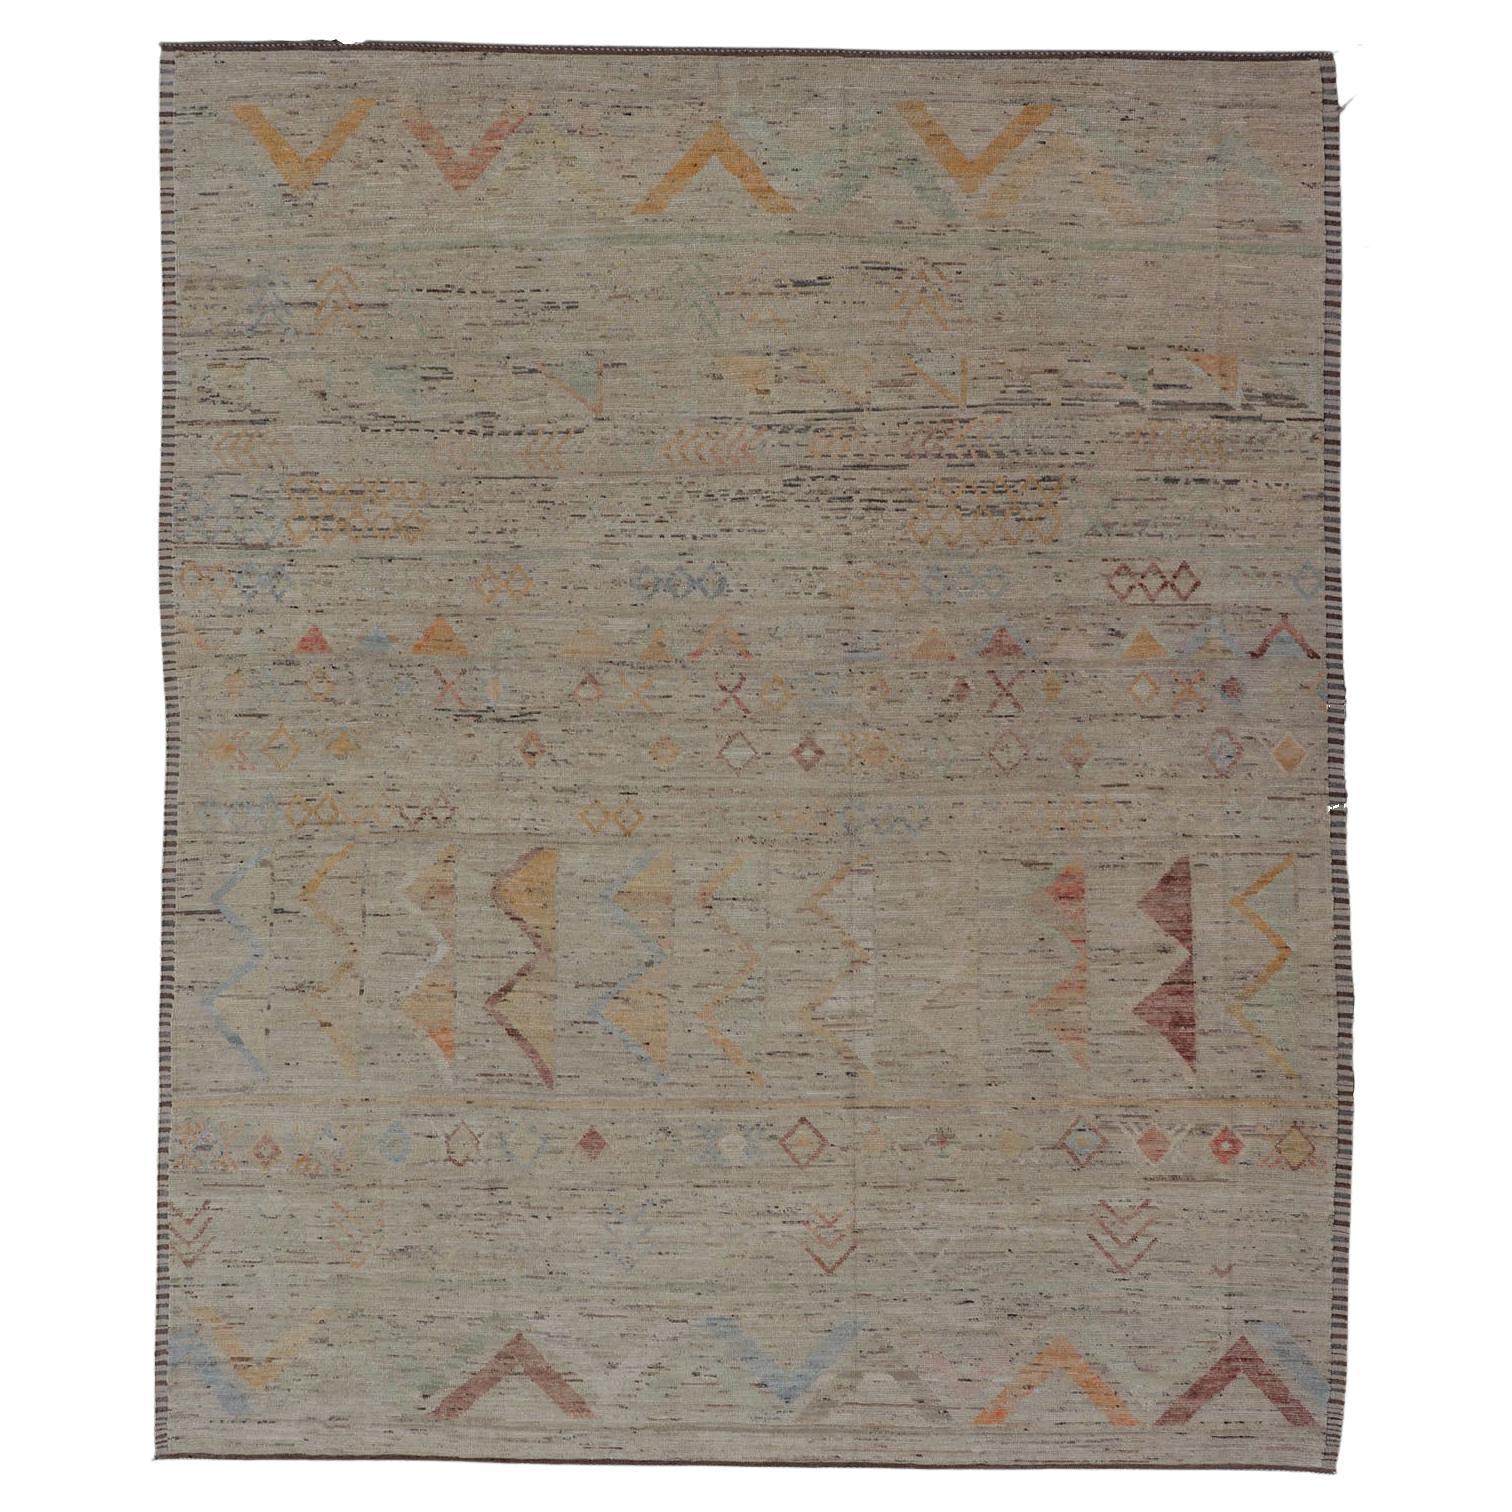 Large Modern Casual Area Rug in Sandy Tones With Pops of Color